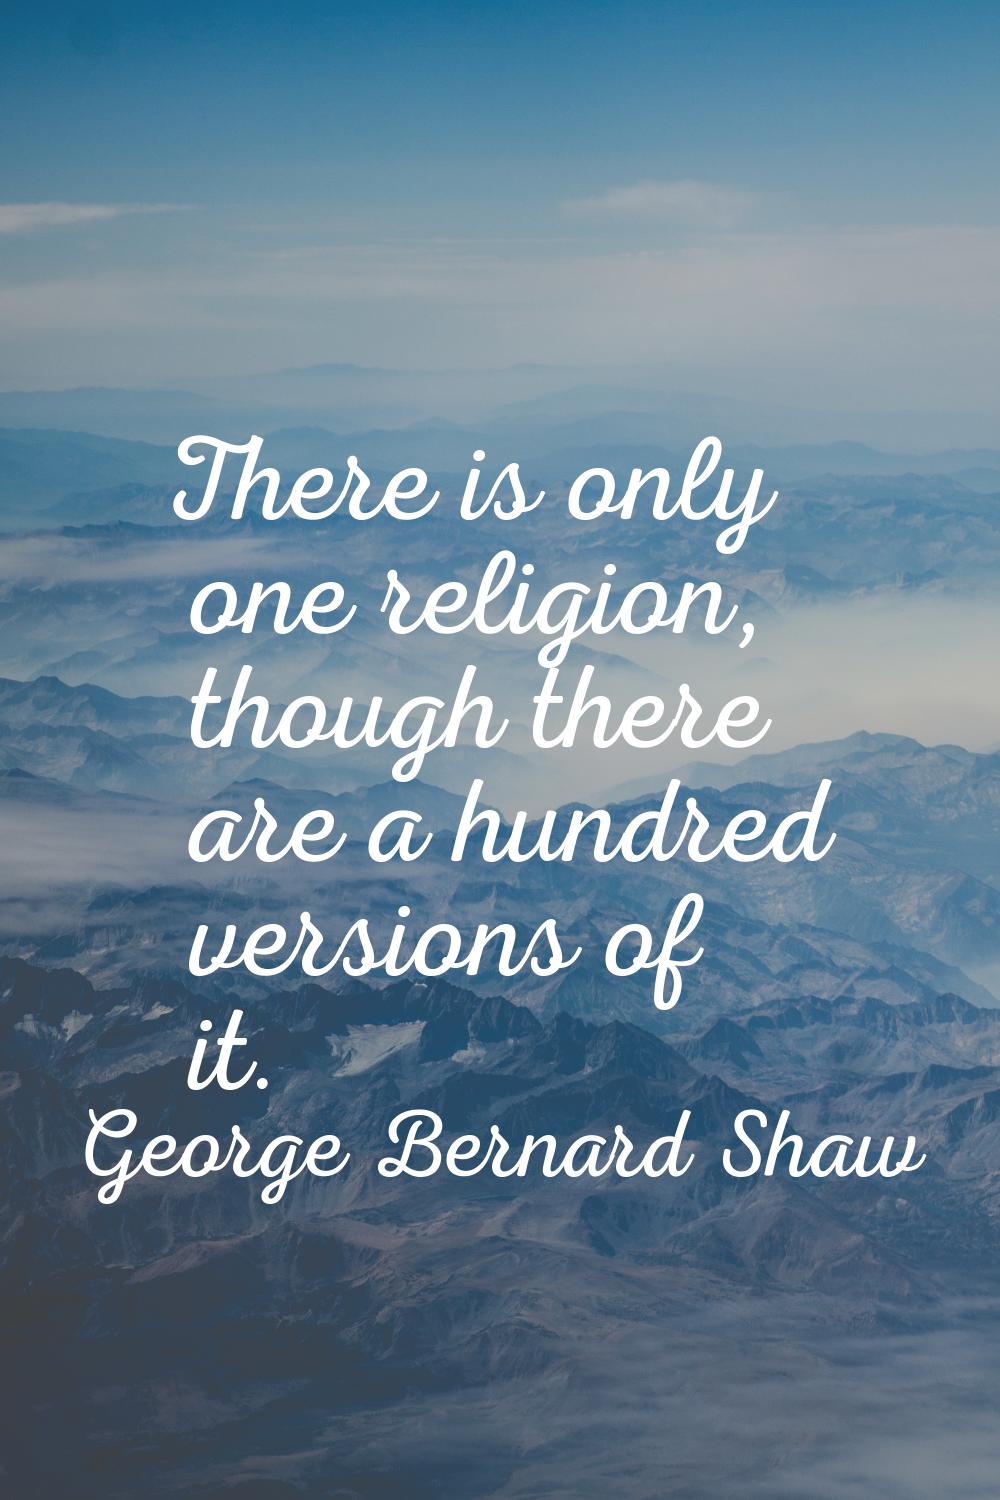 There is only one religion, though there are a hundred versions of it.